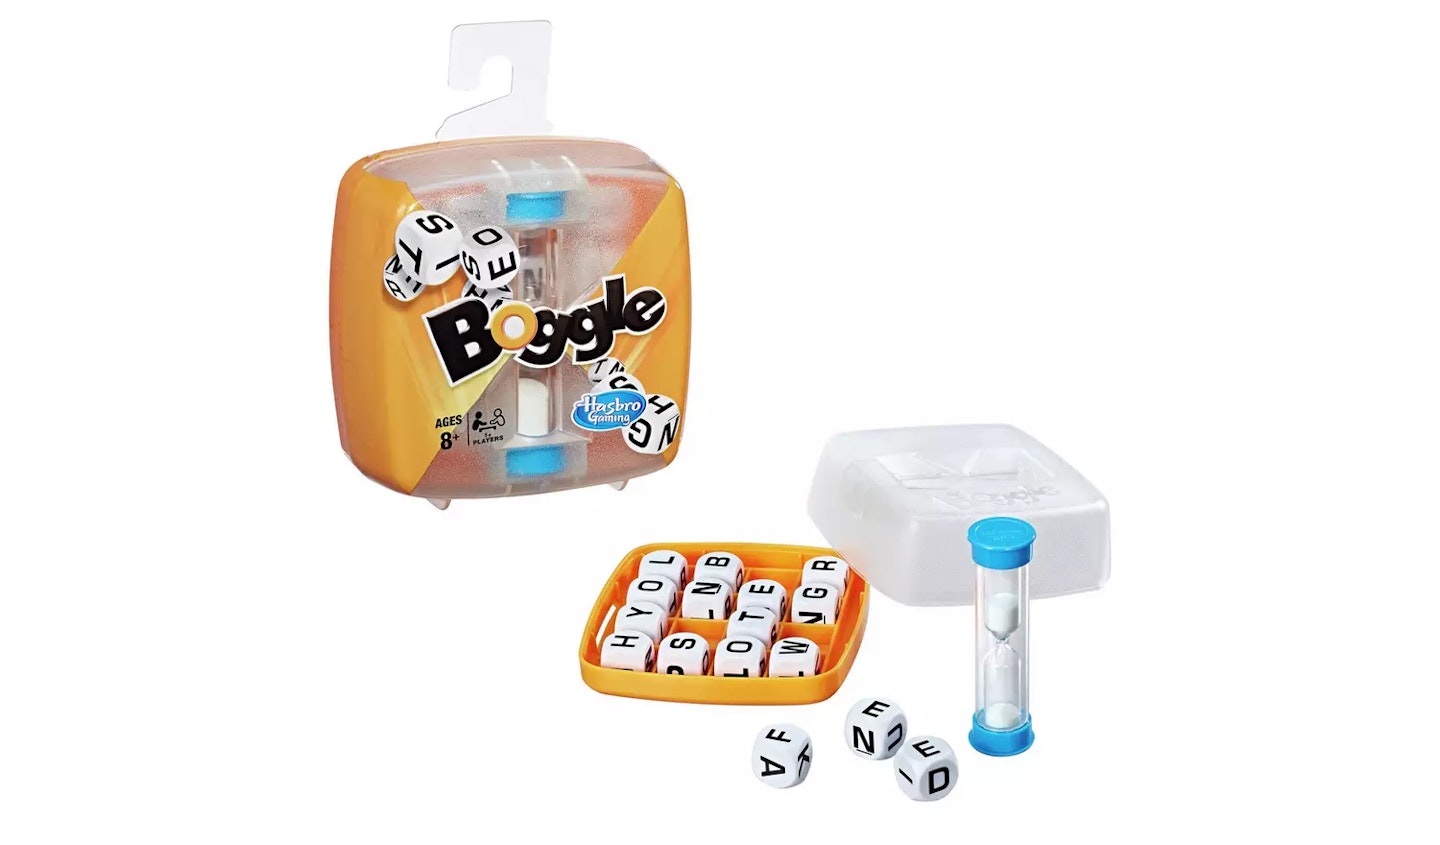 Boggle game box and content